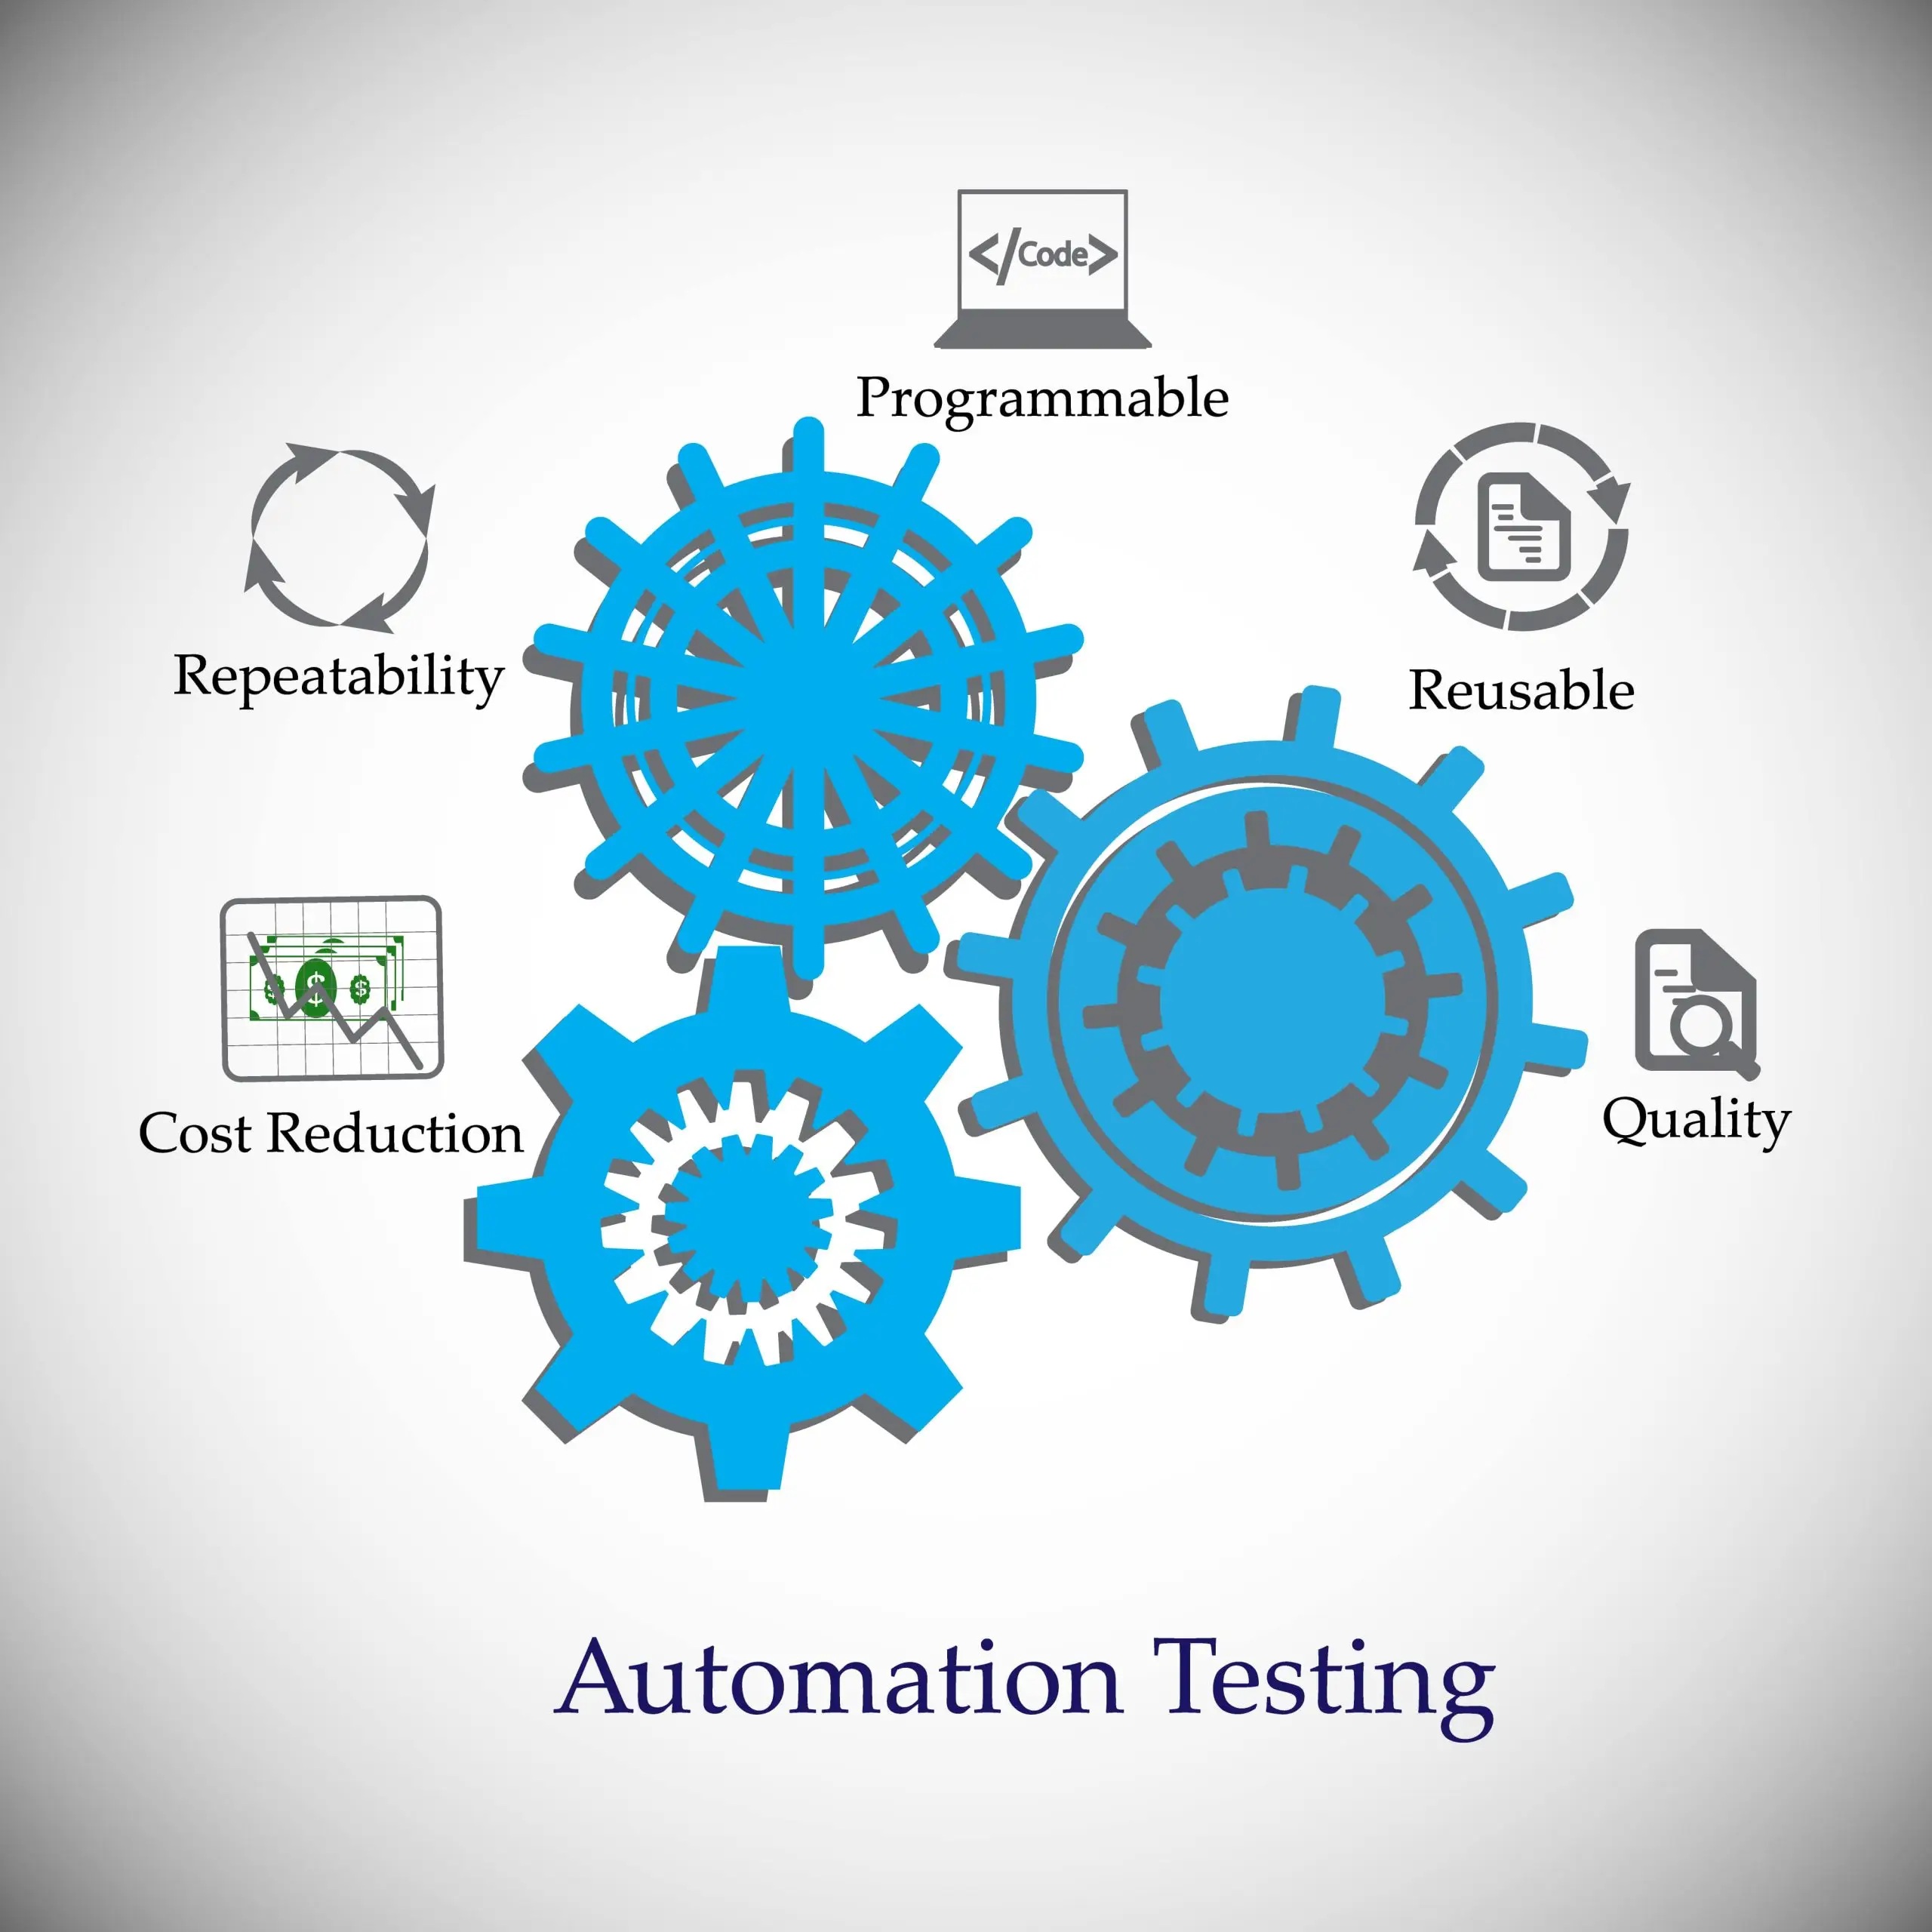 5 Tips for Better Test Automation Management